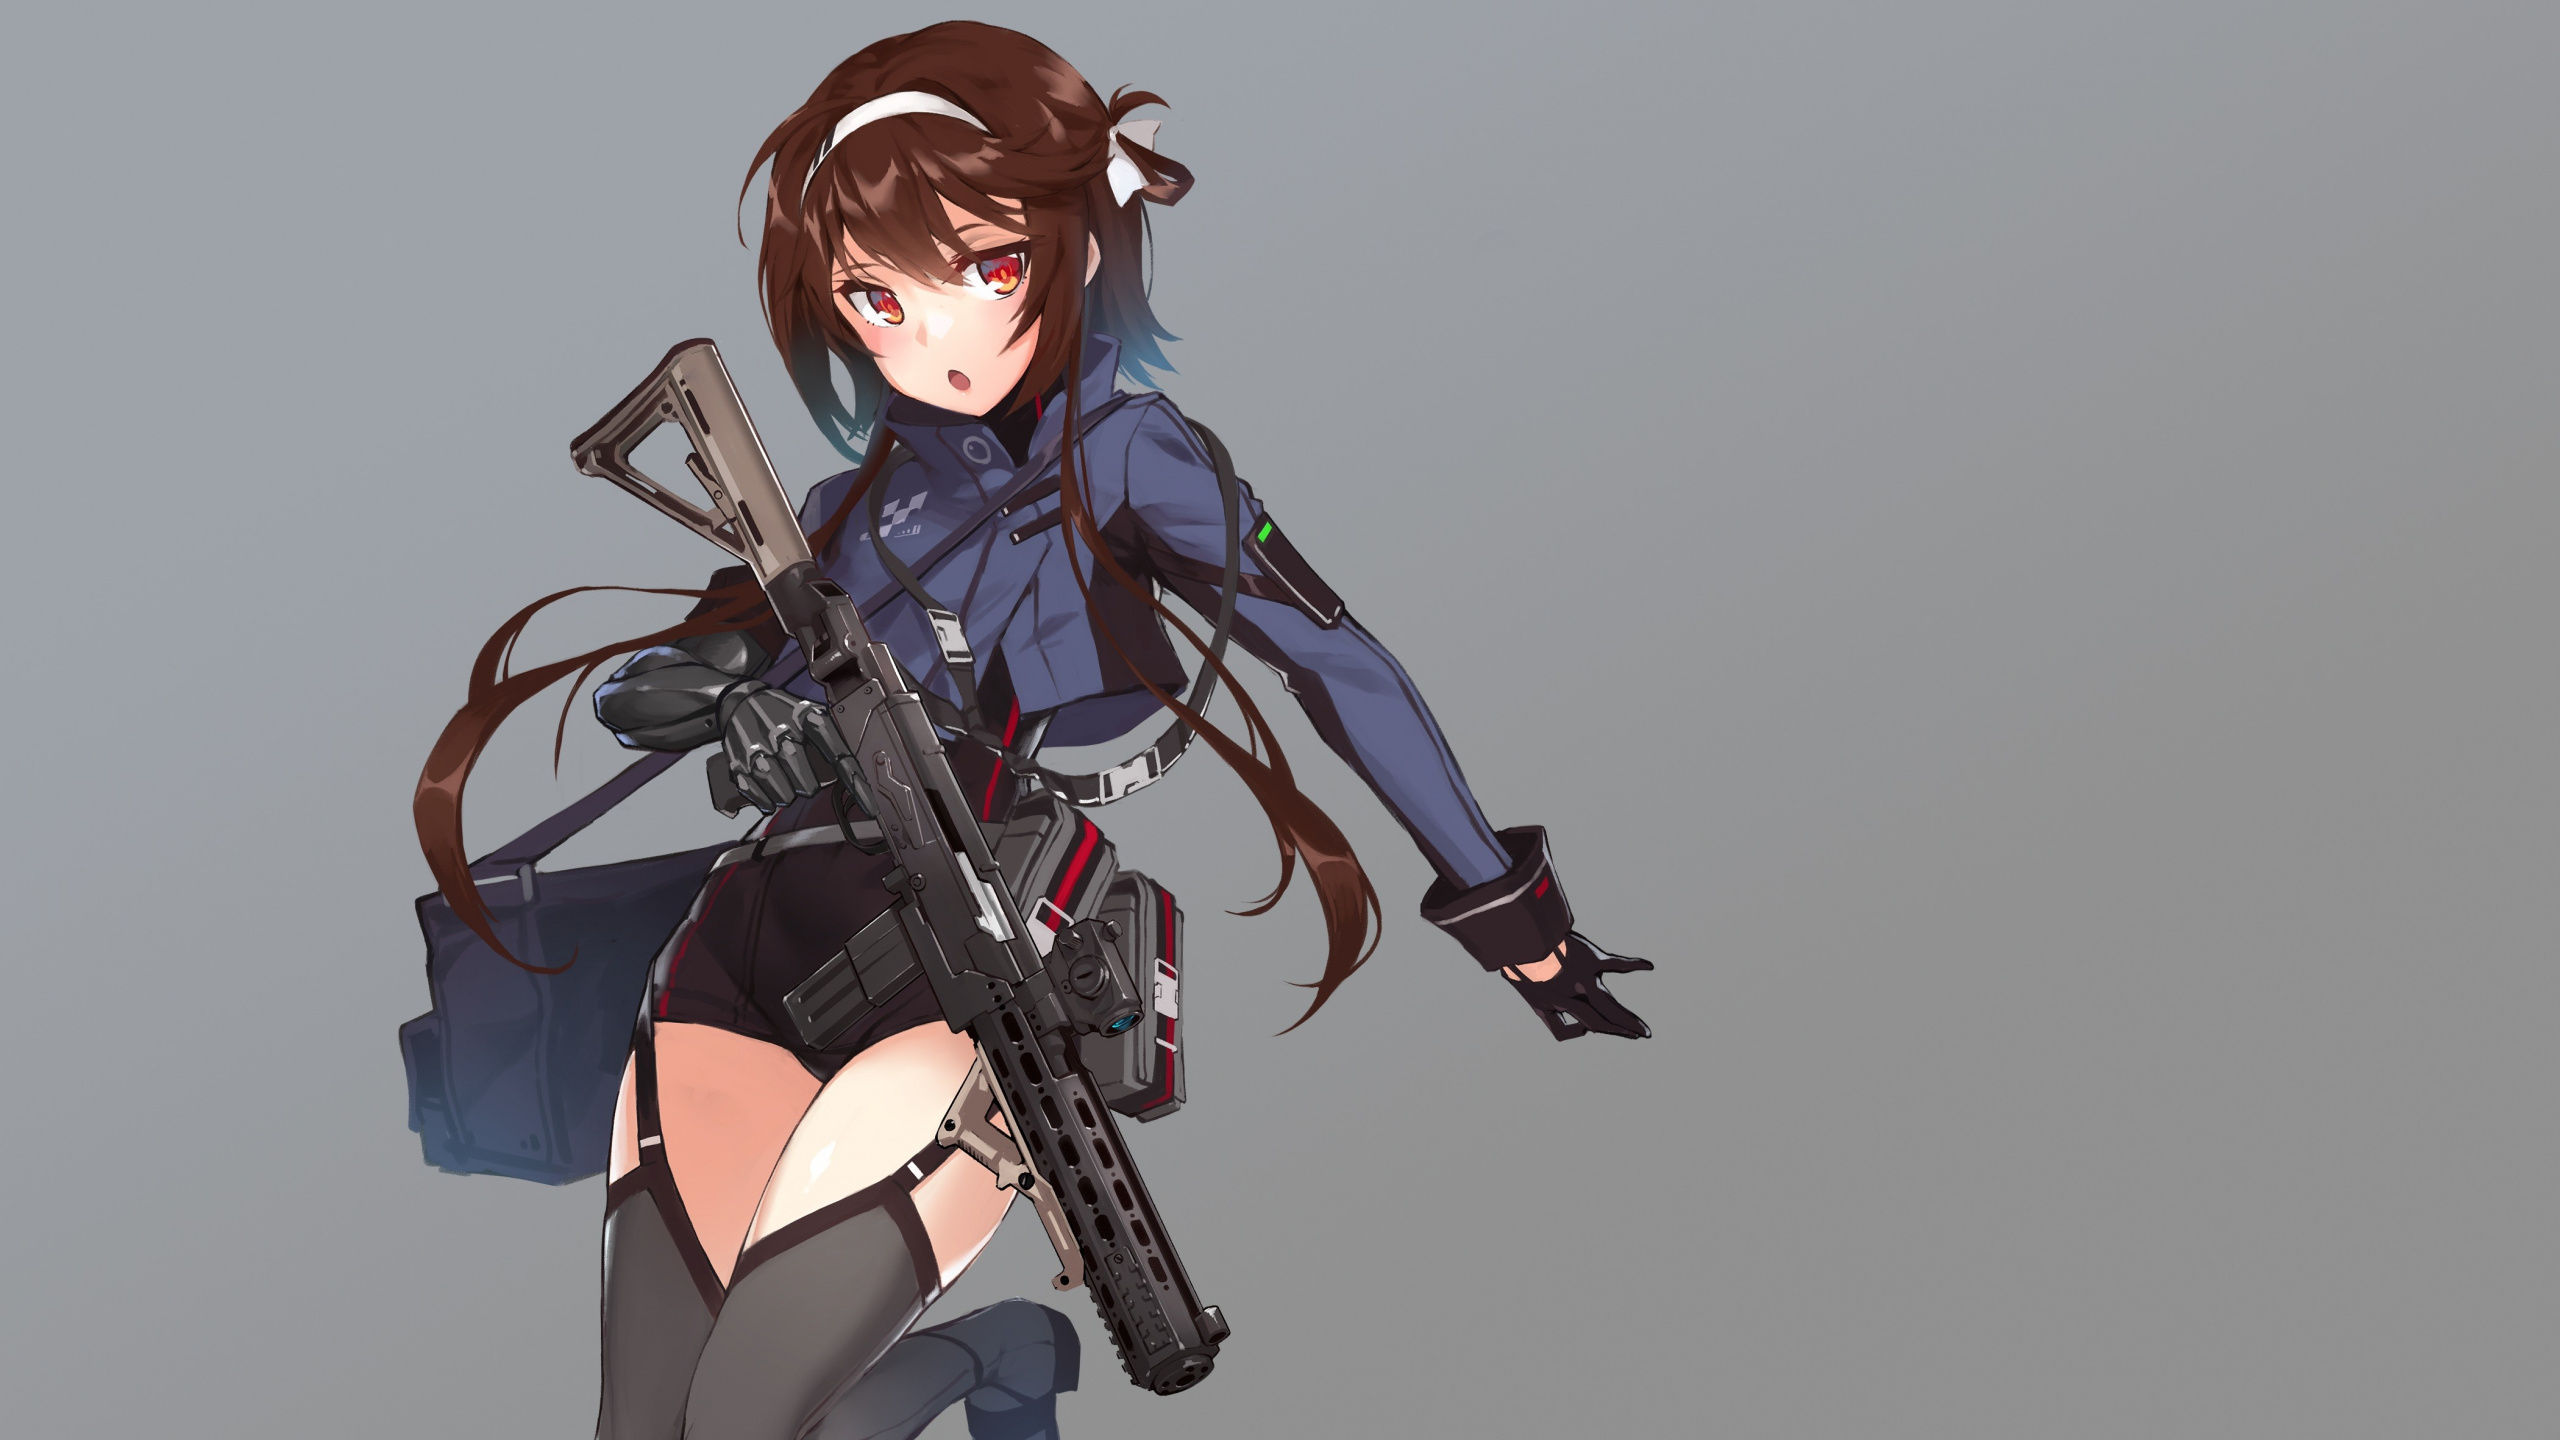 Woman in Blue and Black Dress Holding Rifle Anime Character. Wallpaper in 2560x1440 Resolution